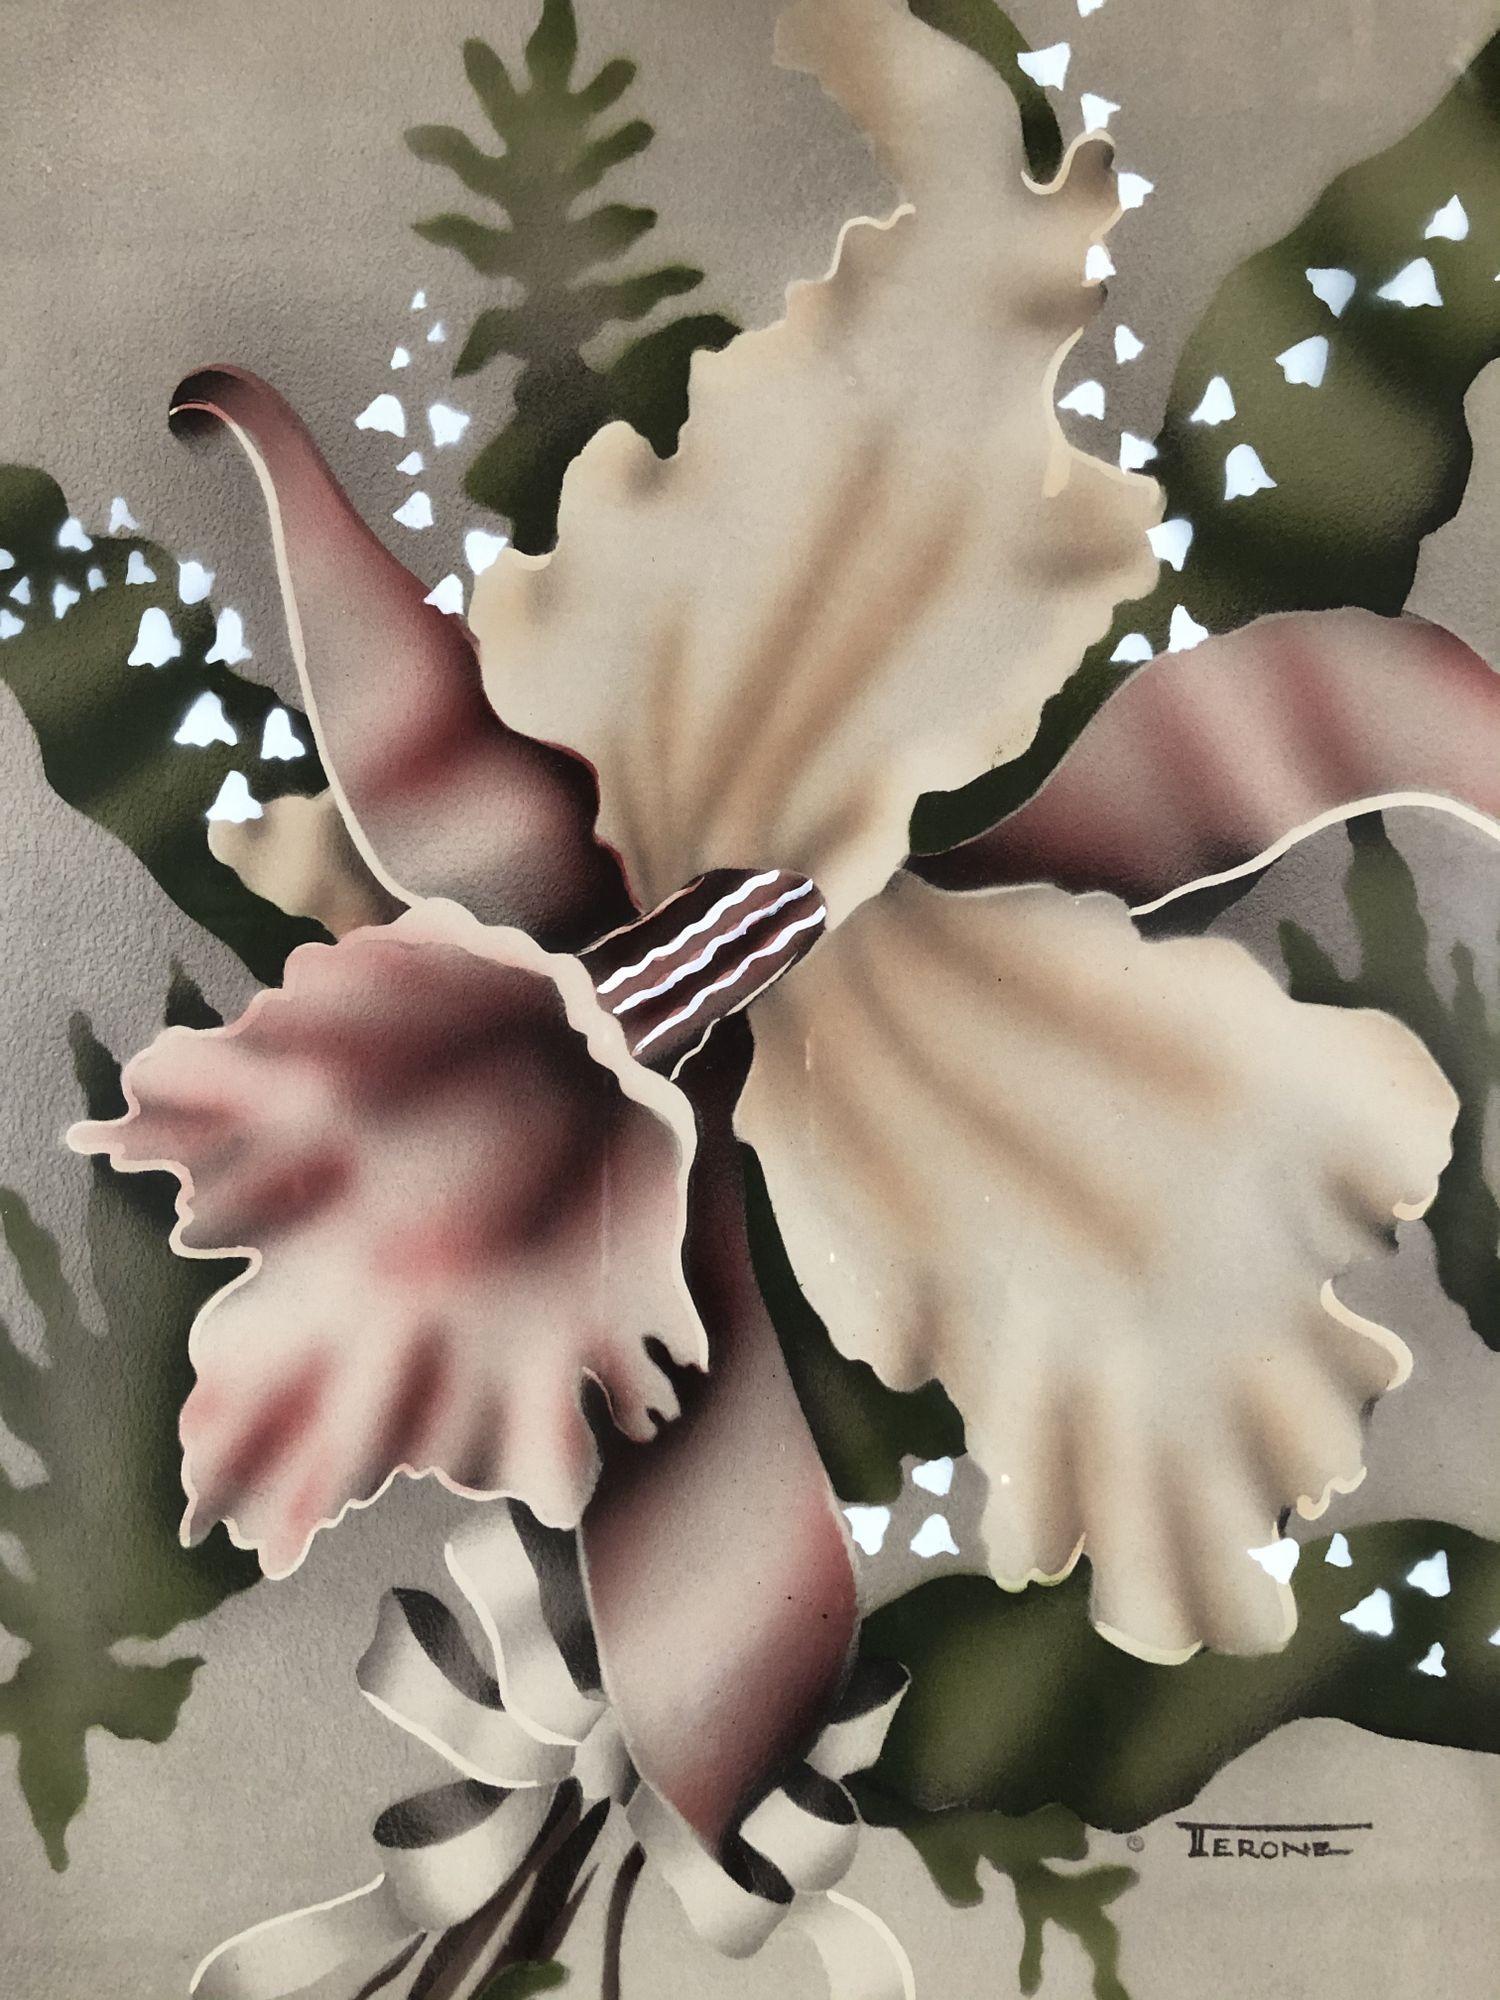 Original artwork Pink Daffodil Hawaiian Flowers with a bow (original airbrushed over a print) signed by Terone. In hardwood frame with carved details. A great example of the post-WWII Hawaiian and tropical artwork/decorating boom. Great for vintage